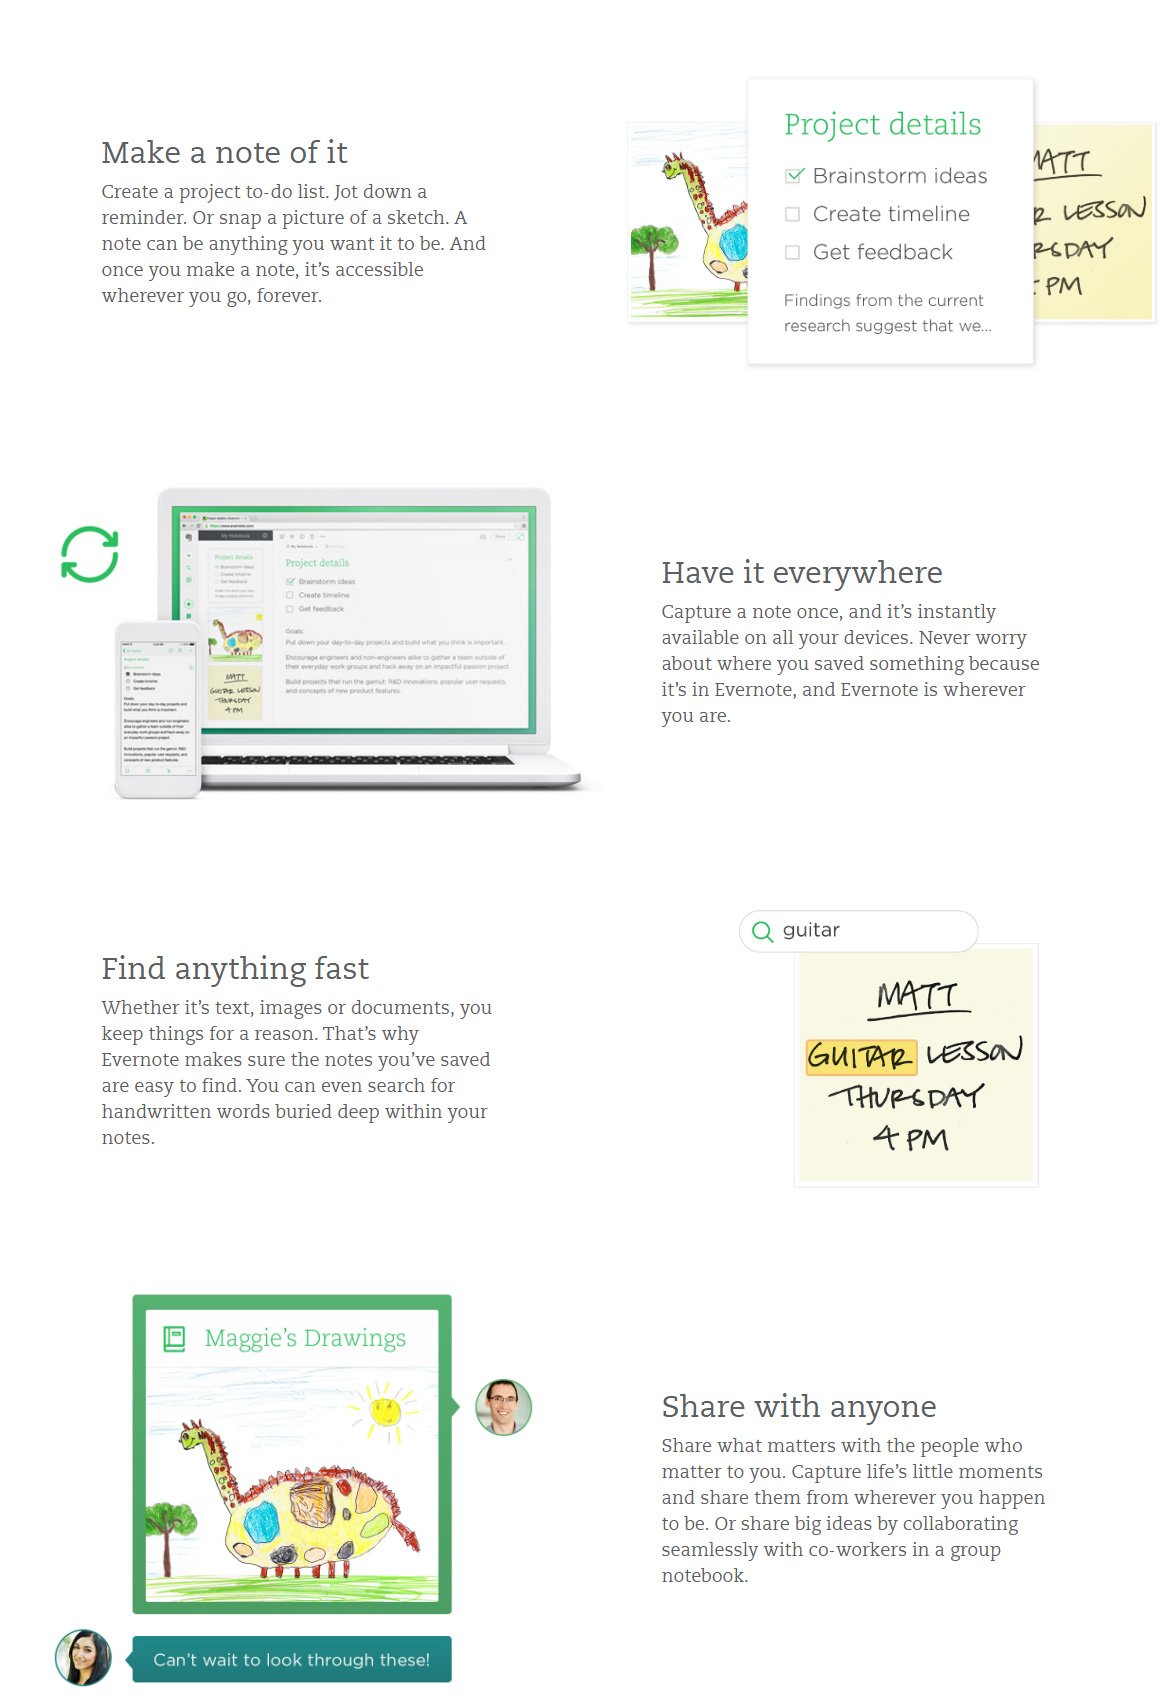 evernote-value-proposition